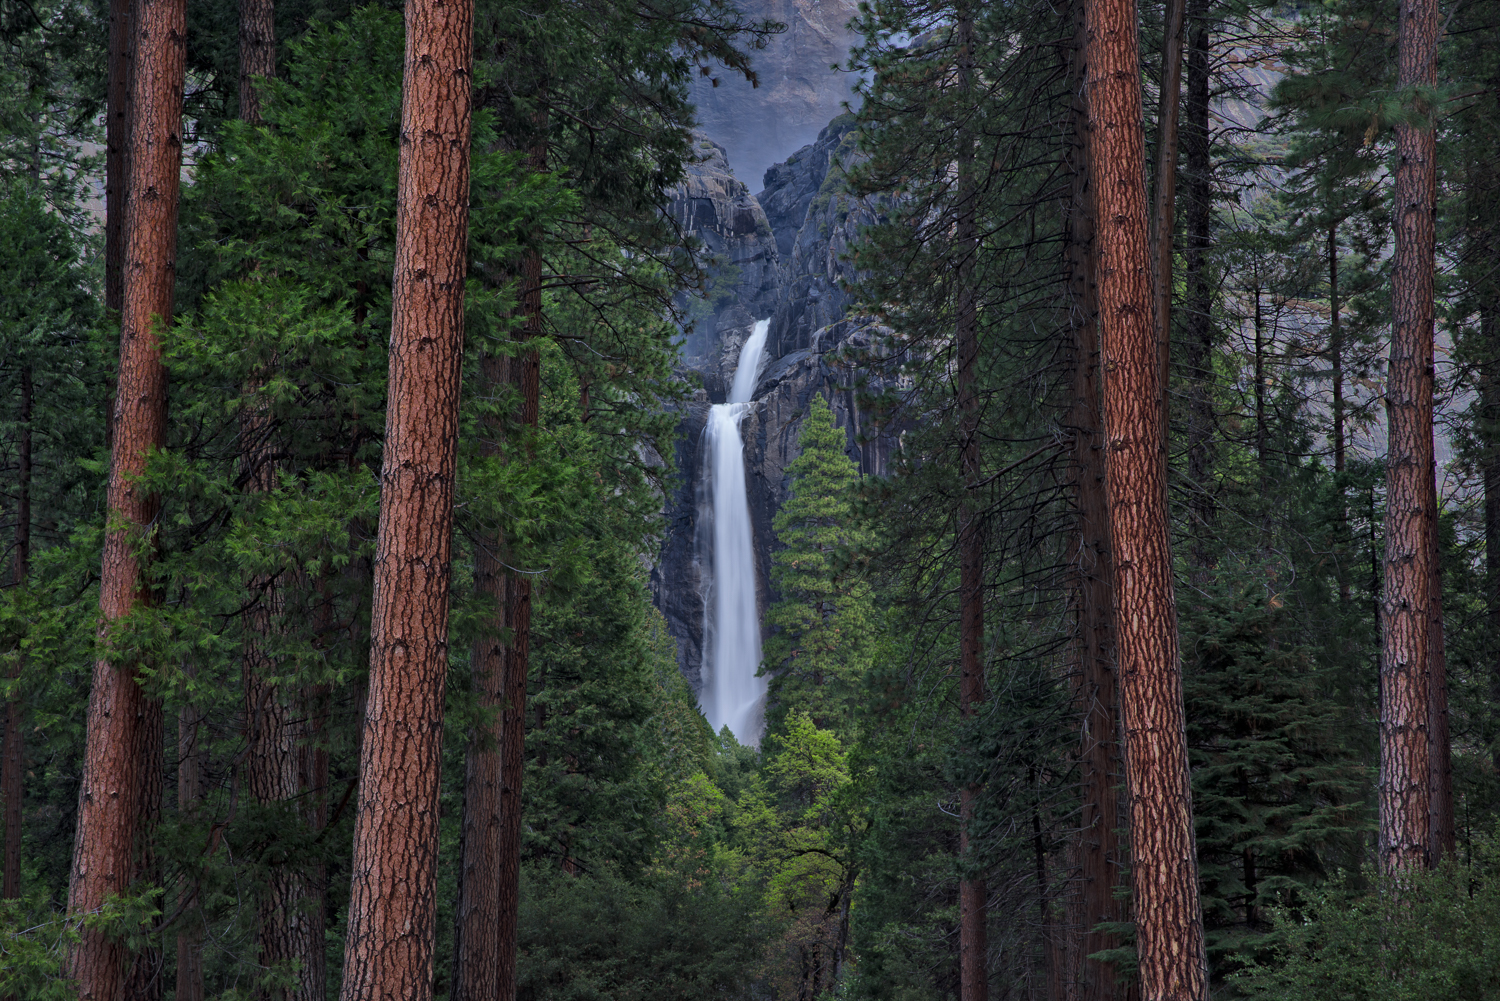 The view of Yosemite Falls through the Trees from the Yosemite Fall's Trail